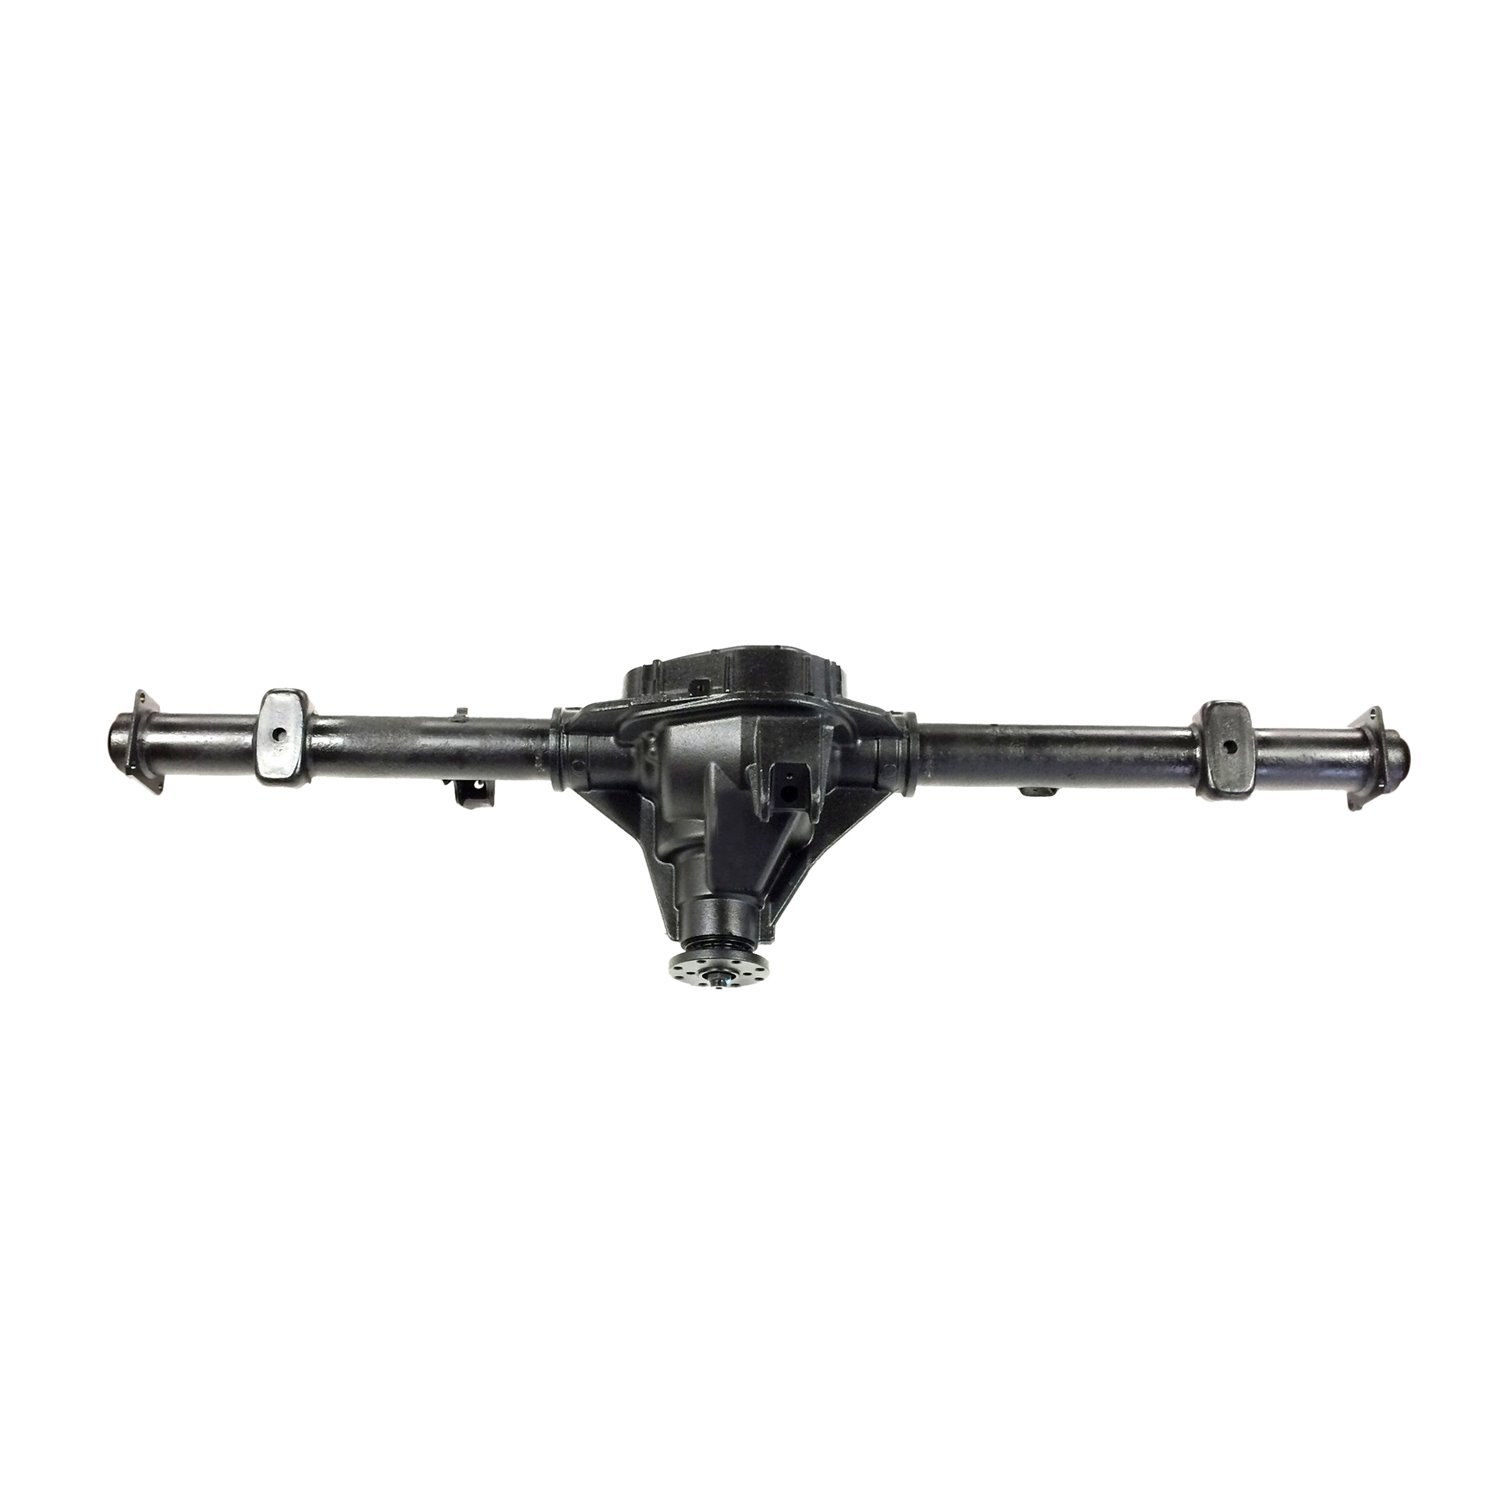 Remanufactured Complete Axle Assembly for Ford 9.75" 2011 Ford F150 4.11 Ratio, 6 Lug